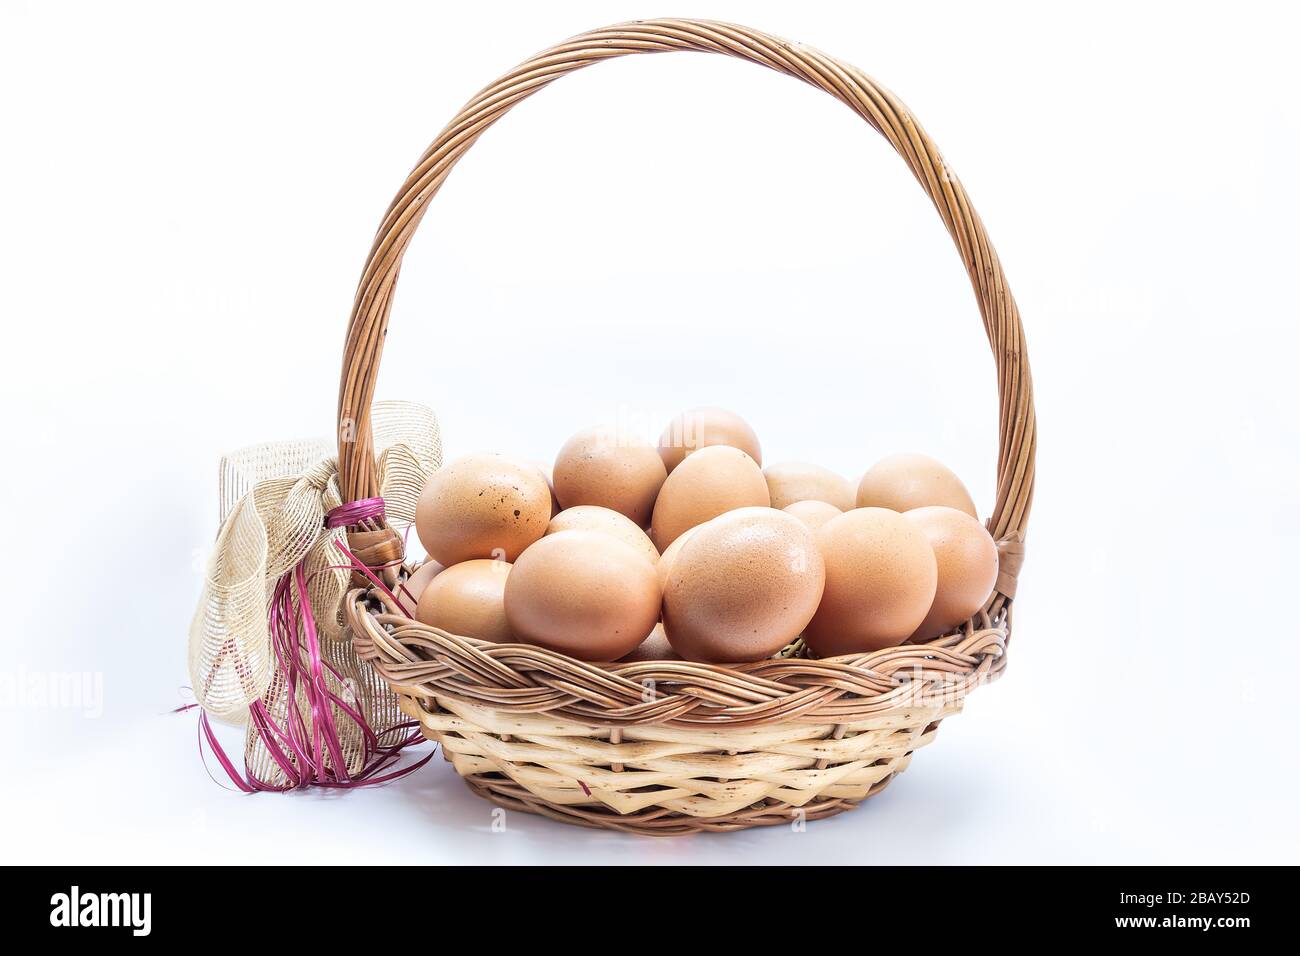 Organic farm eggs in Wicker basket isolated on white background. Chickens eggs from ecologically clean areas Stock Photo